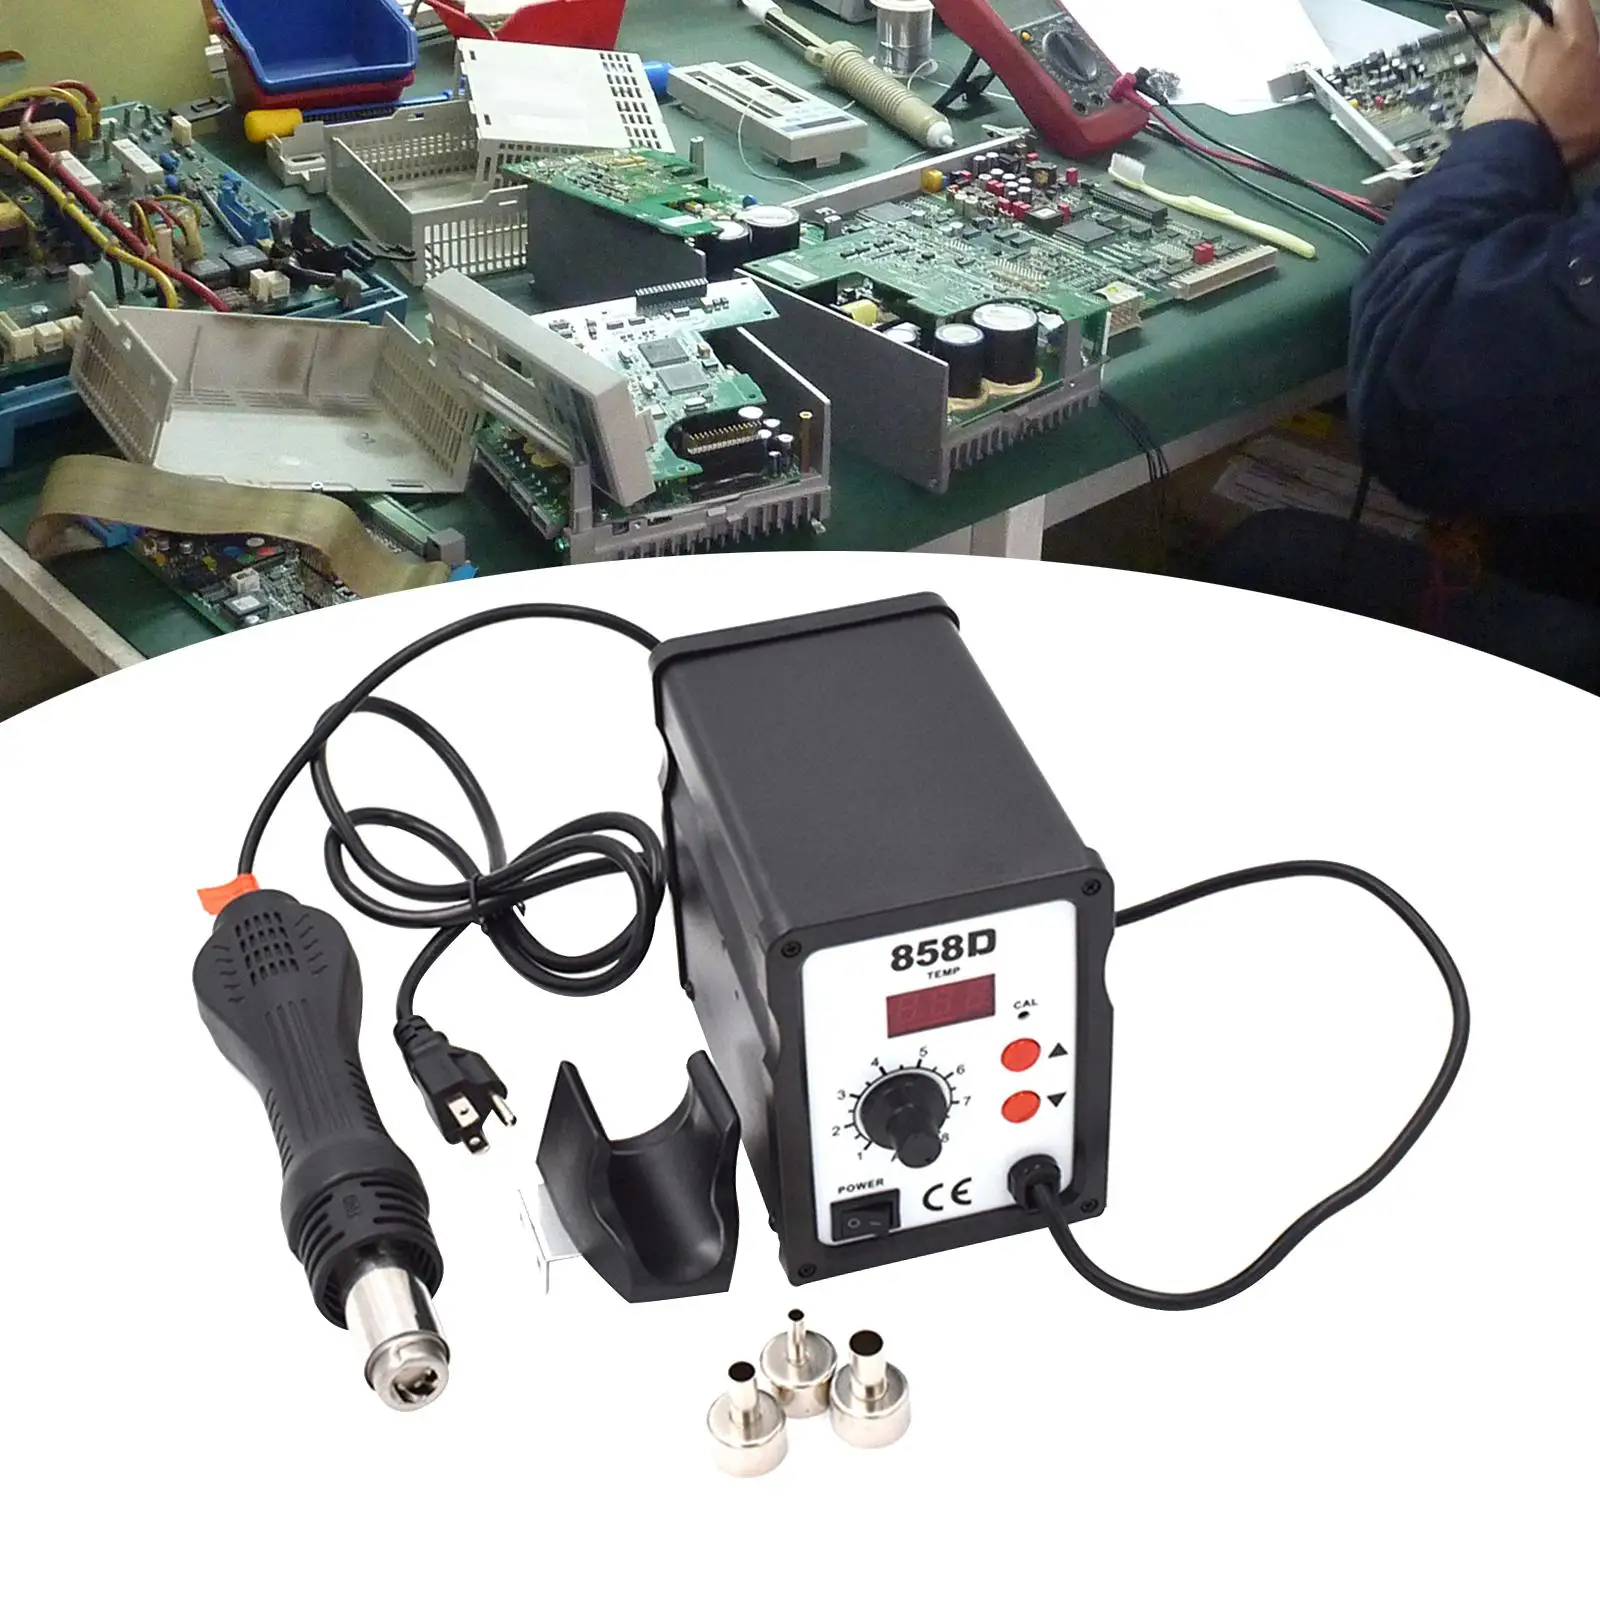 Desoldering Station Portable 858D Hot Air reworks station for Laptop Maintenance Electric Appliance Repairing Circuit Boards